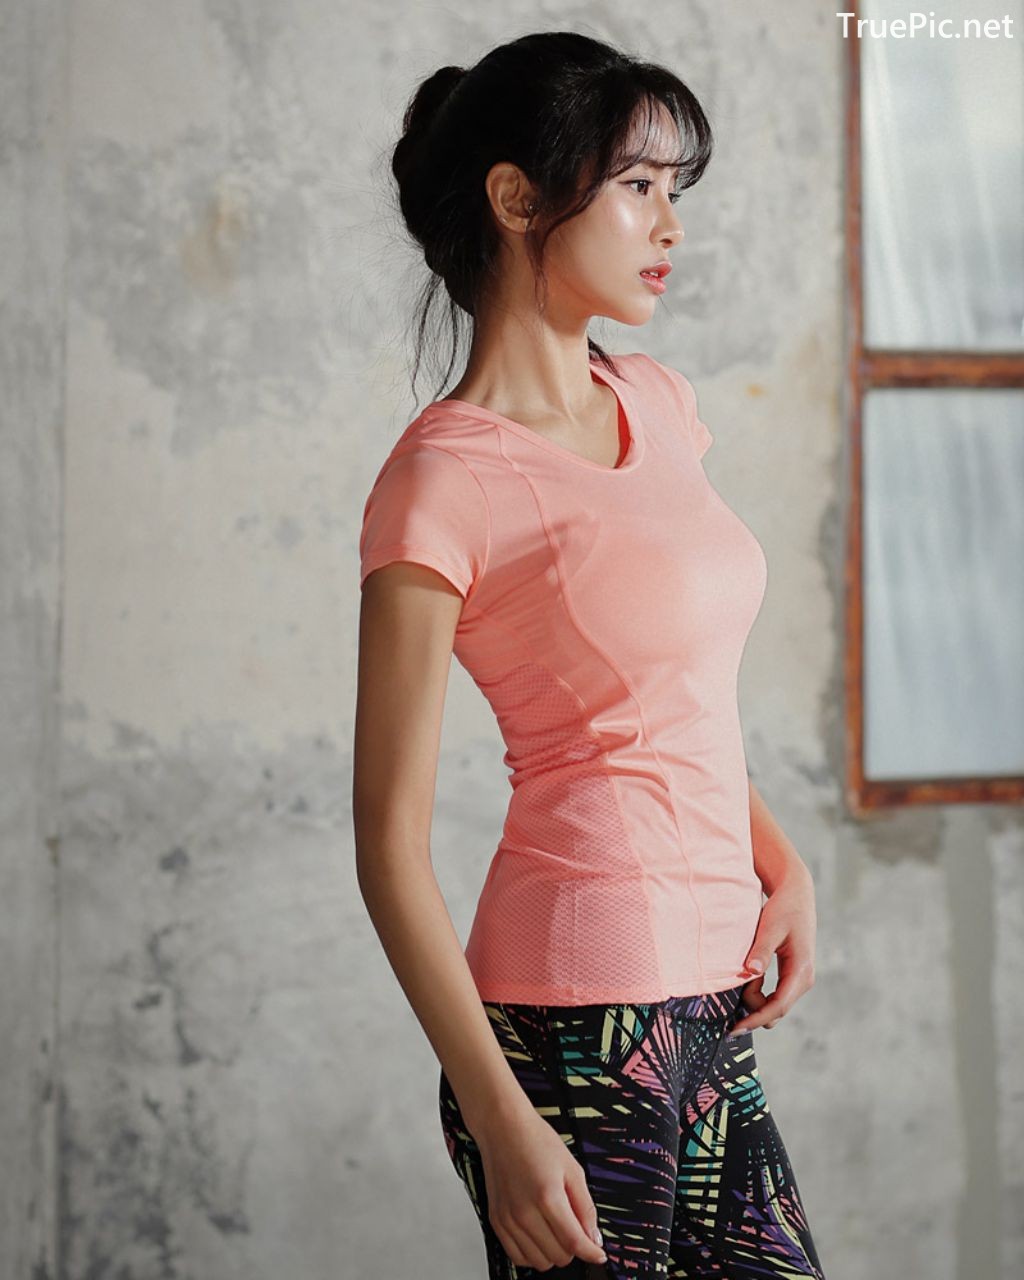 Image-Korean-Fashion-Model-Ju-Woo-Fitness-Set-Collection-TruePic.net- Picture-129